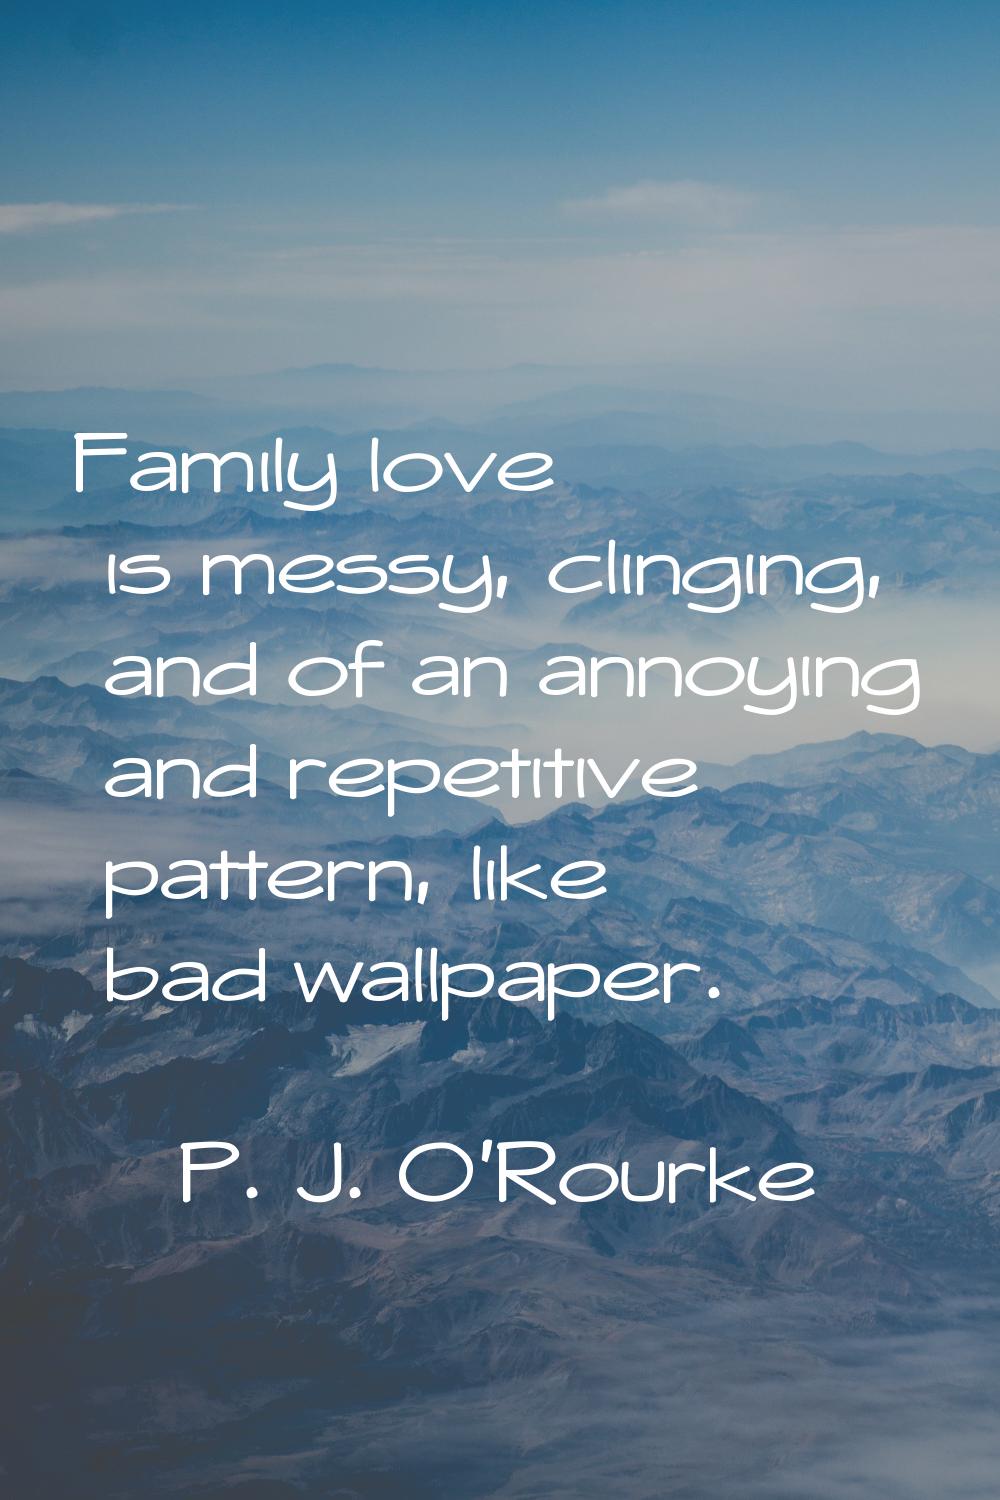 Family love is messy, clinging, and of an annoying and repetitive pattern, like bad wallpaper.